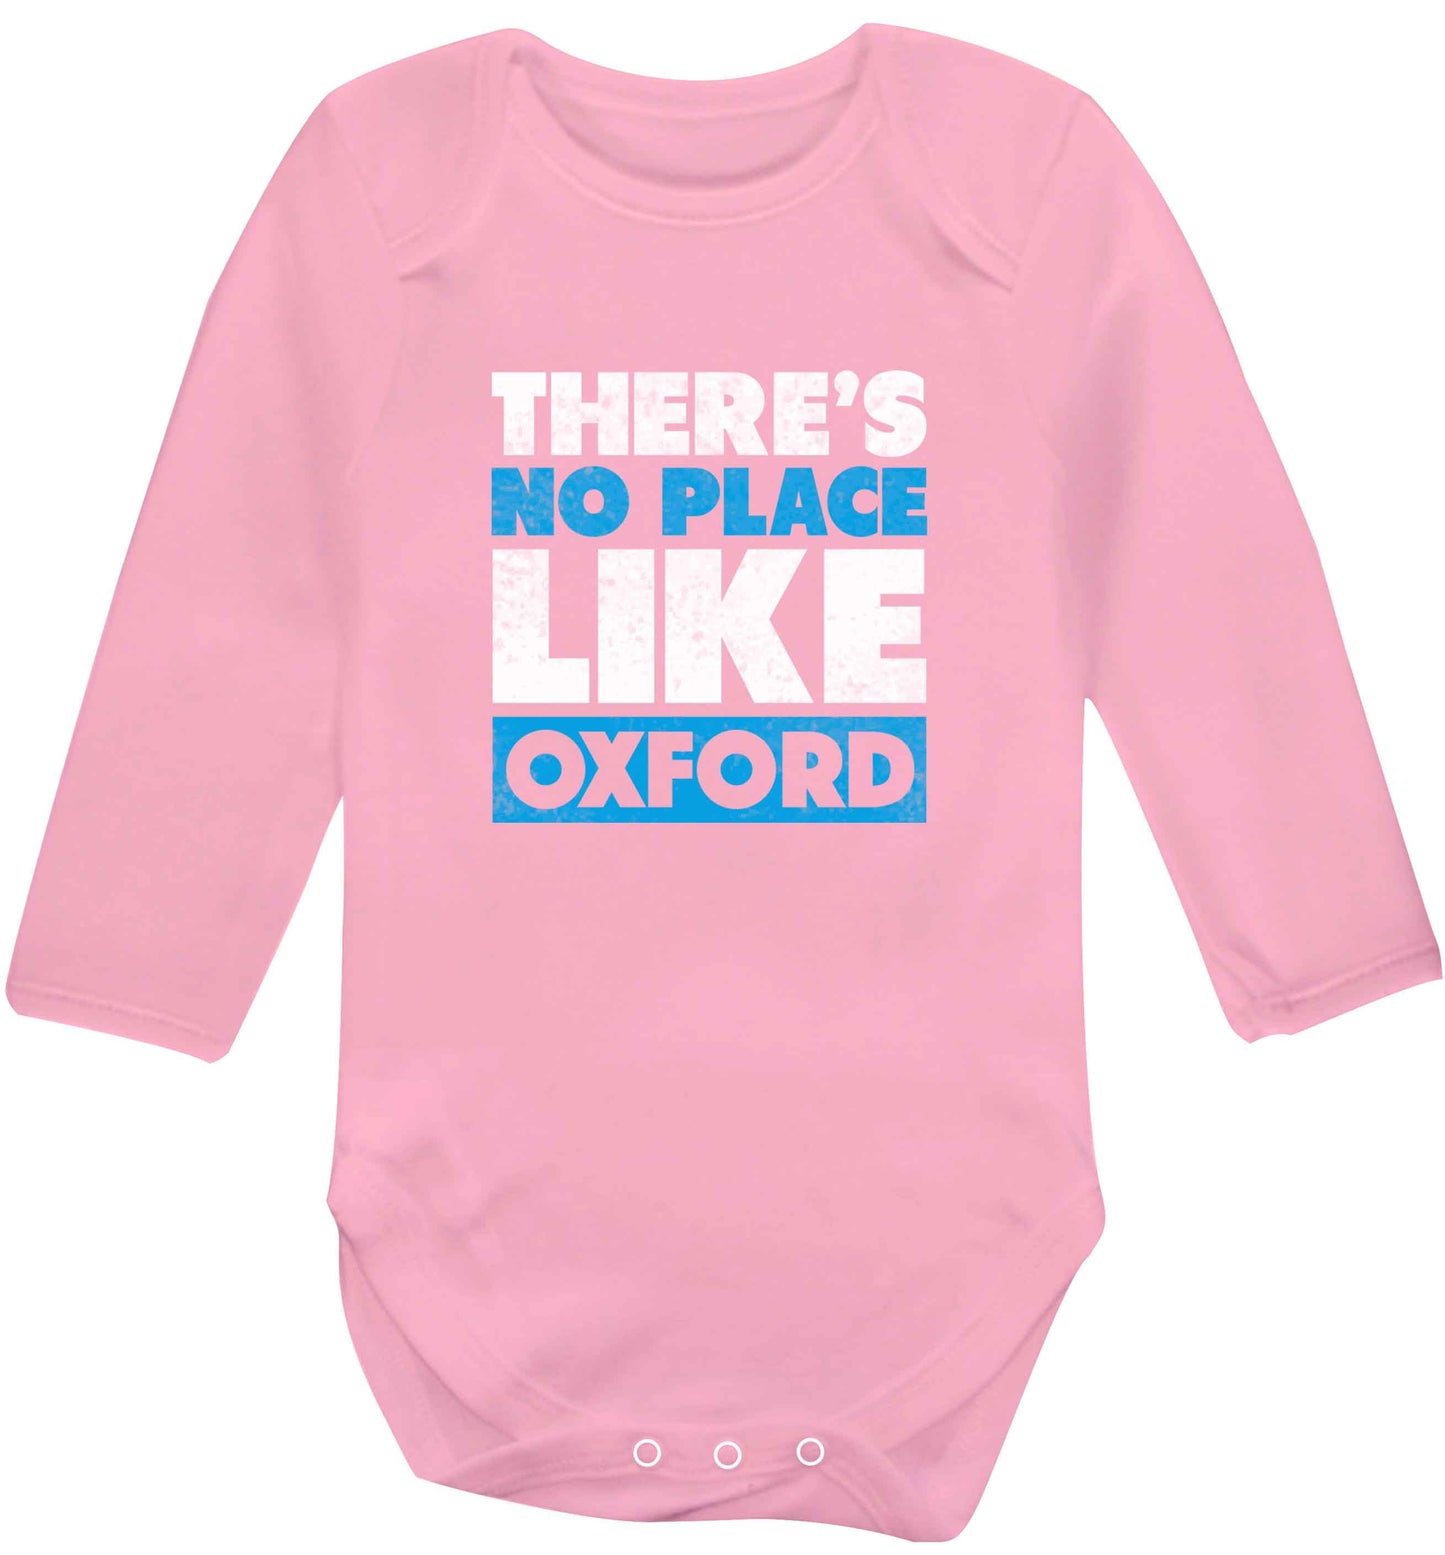 There's no place like Oxford baby vest long sleeved pale pink 6-12 months